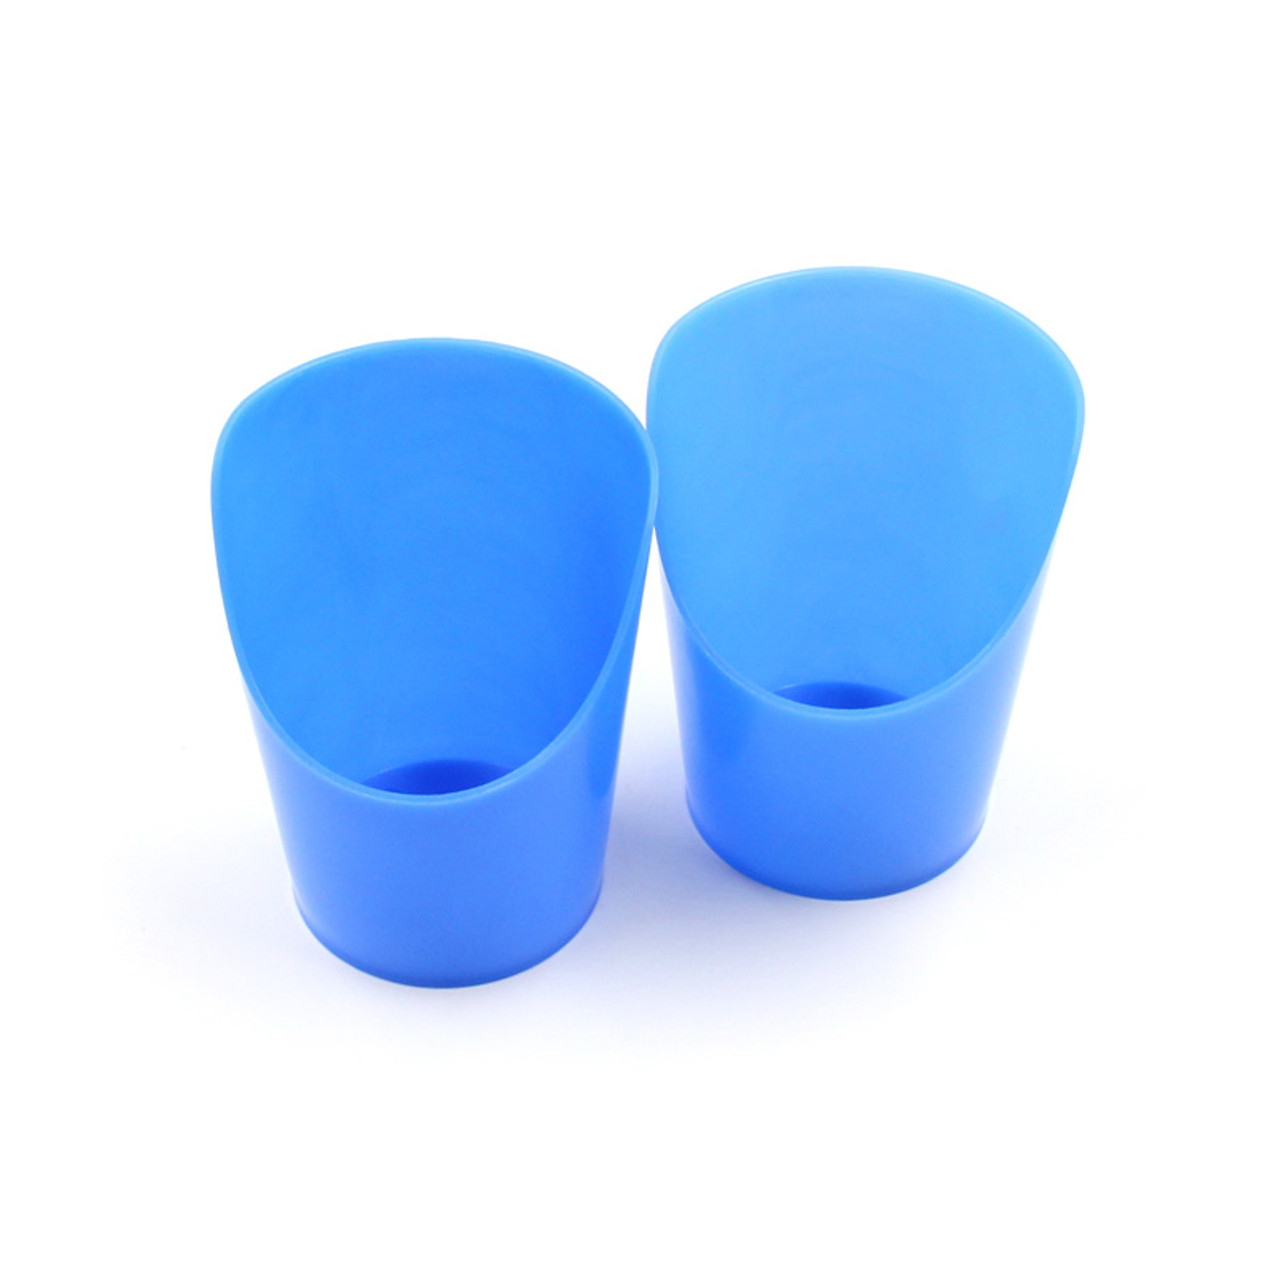 Combo Pack of 9 Flexible Drinking Cups with Nose Mold Cutout, 9 Pc. Set for  Physical Therapy